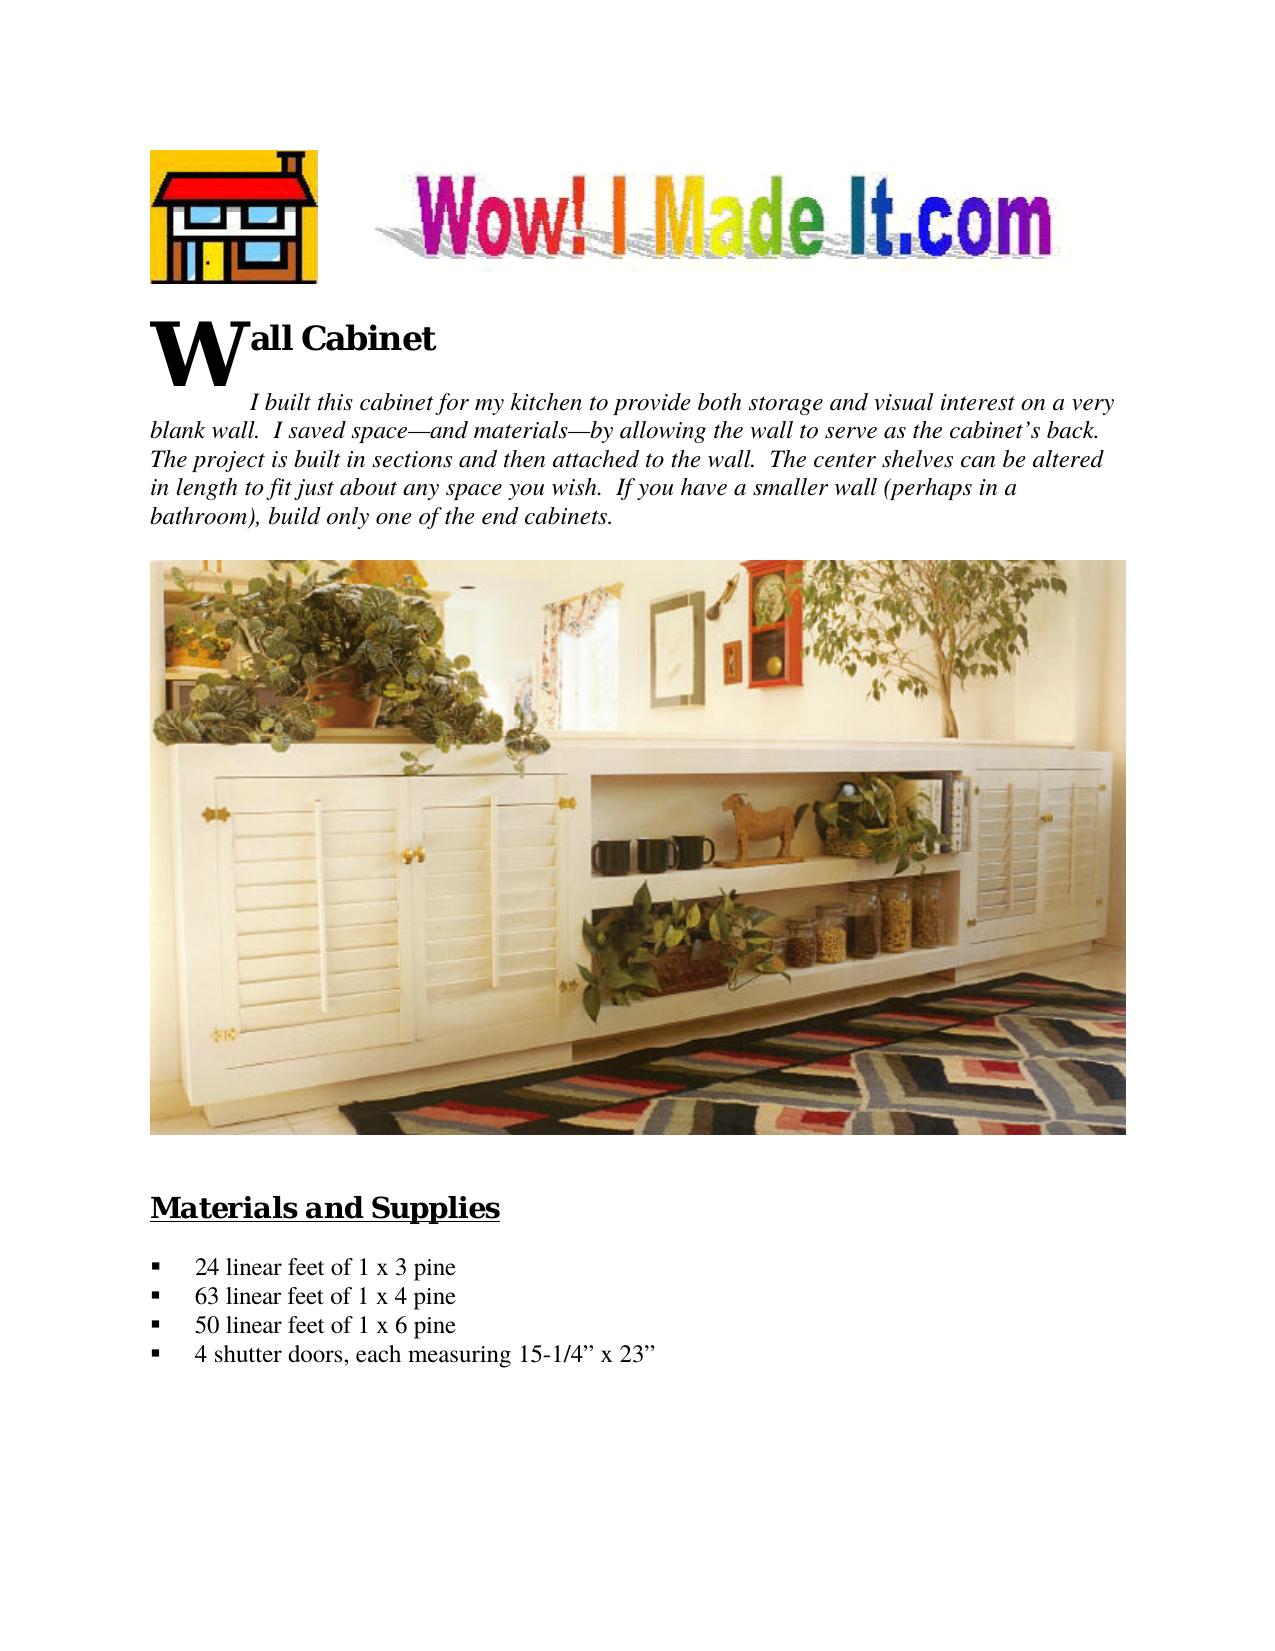 Wall Cabinet by Wall Cabinet